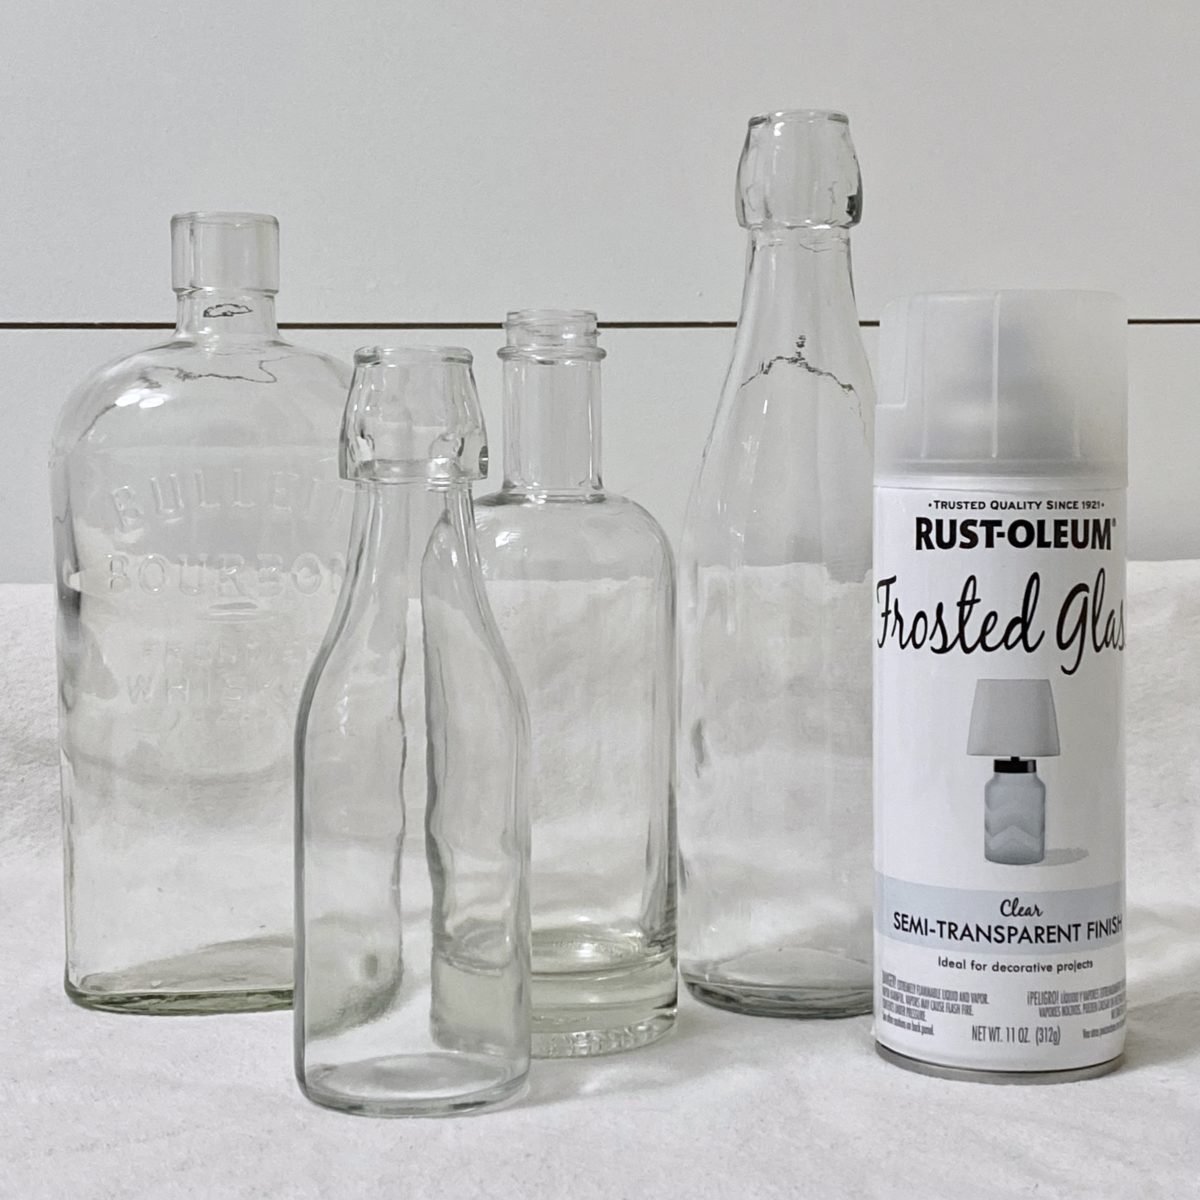 Clear glass bottles next to a can of frosted glass spray paint.